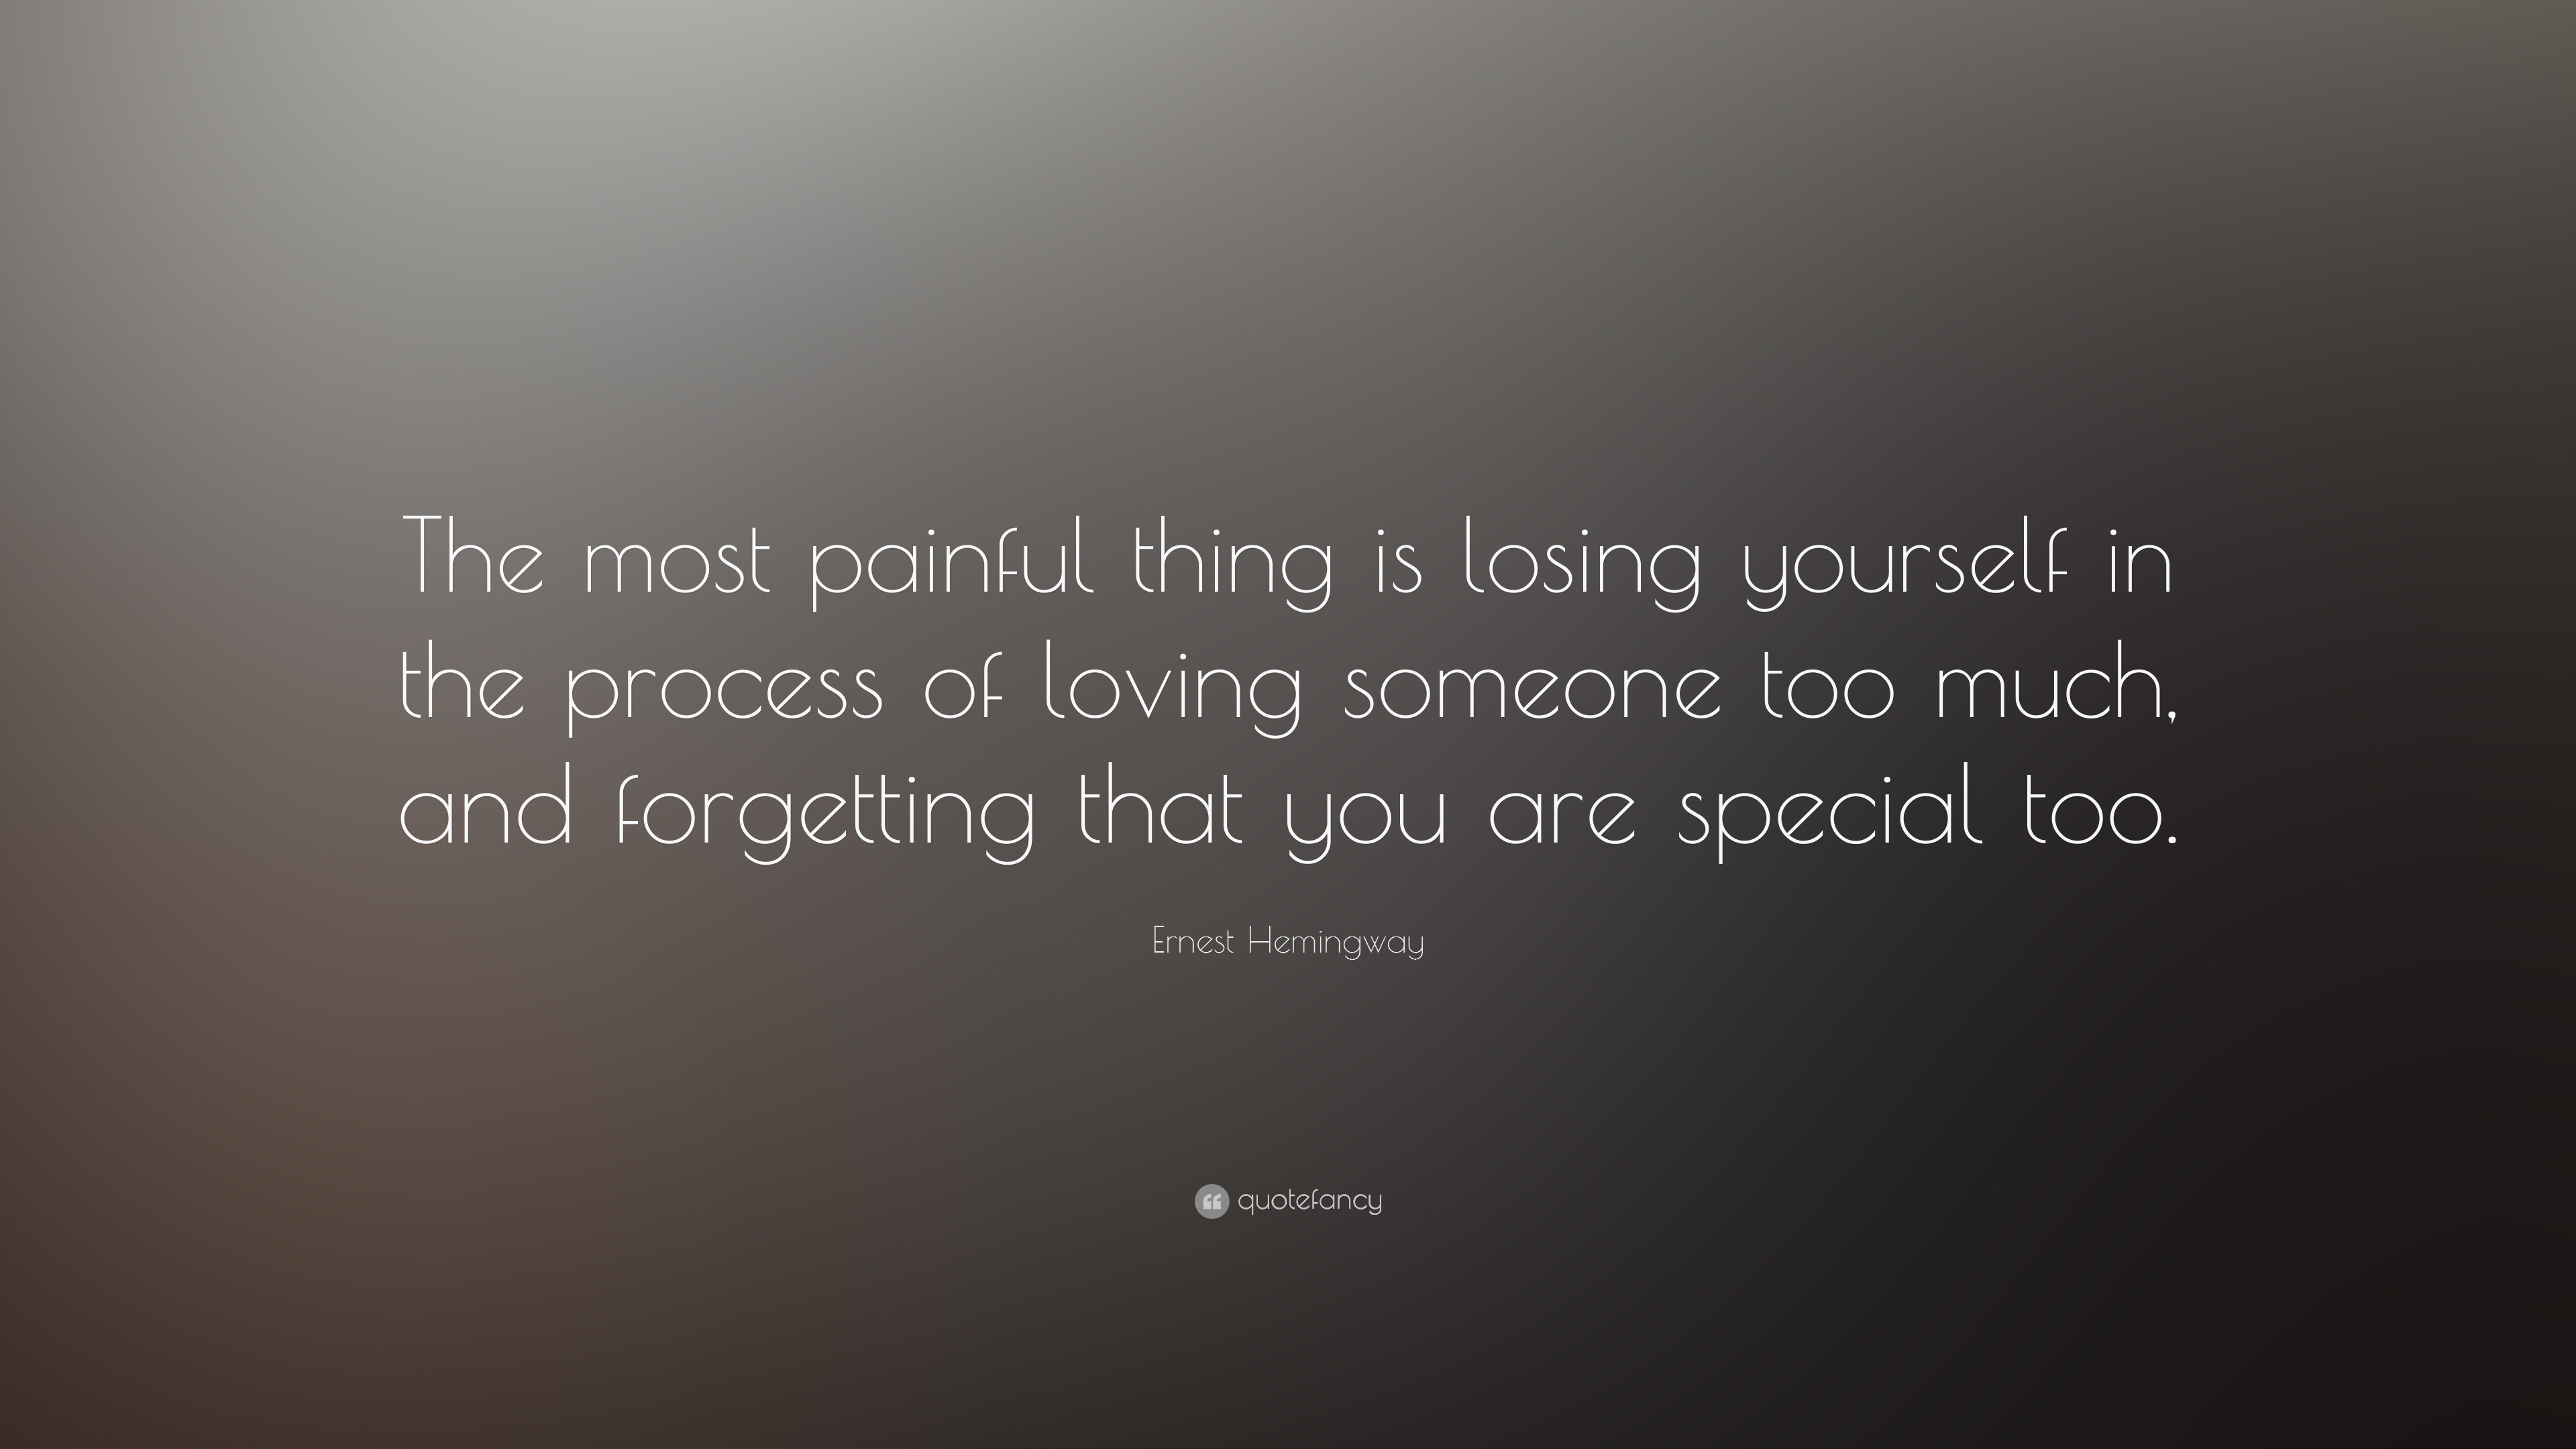 Ernest Hemingway Quote “The most painful thing is losing yourself in the process of